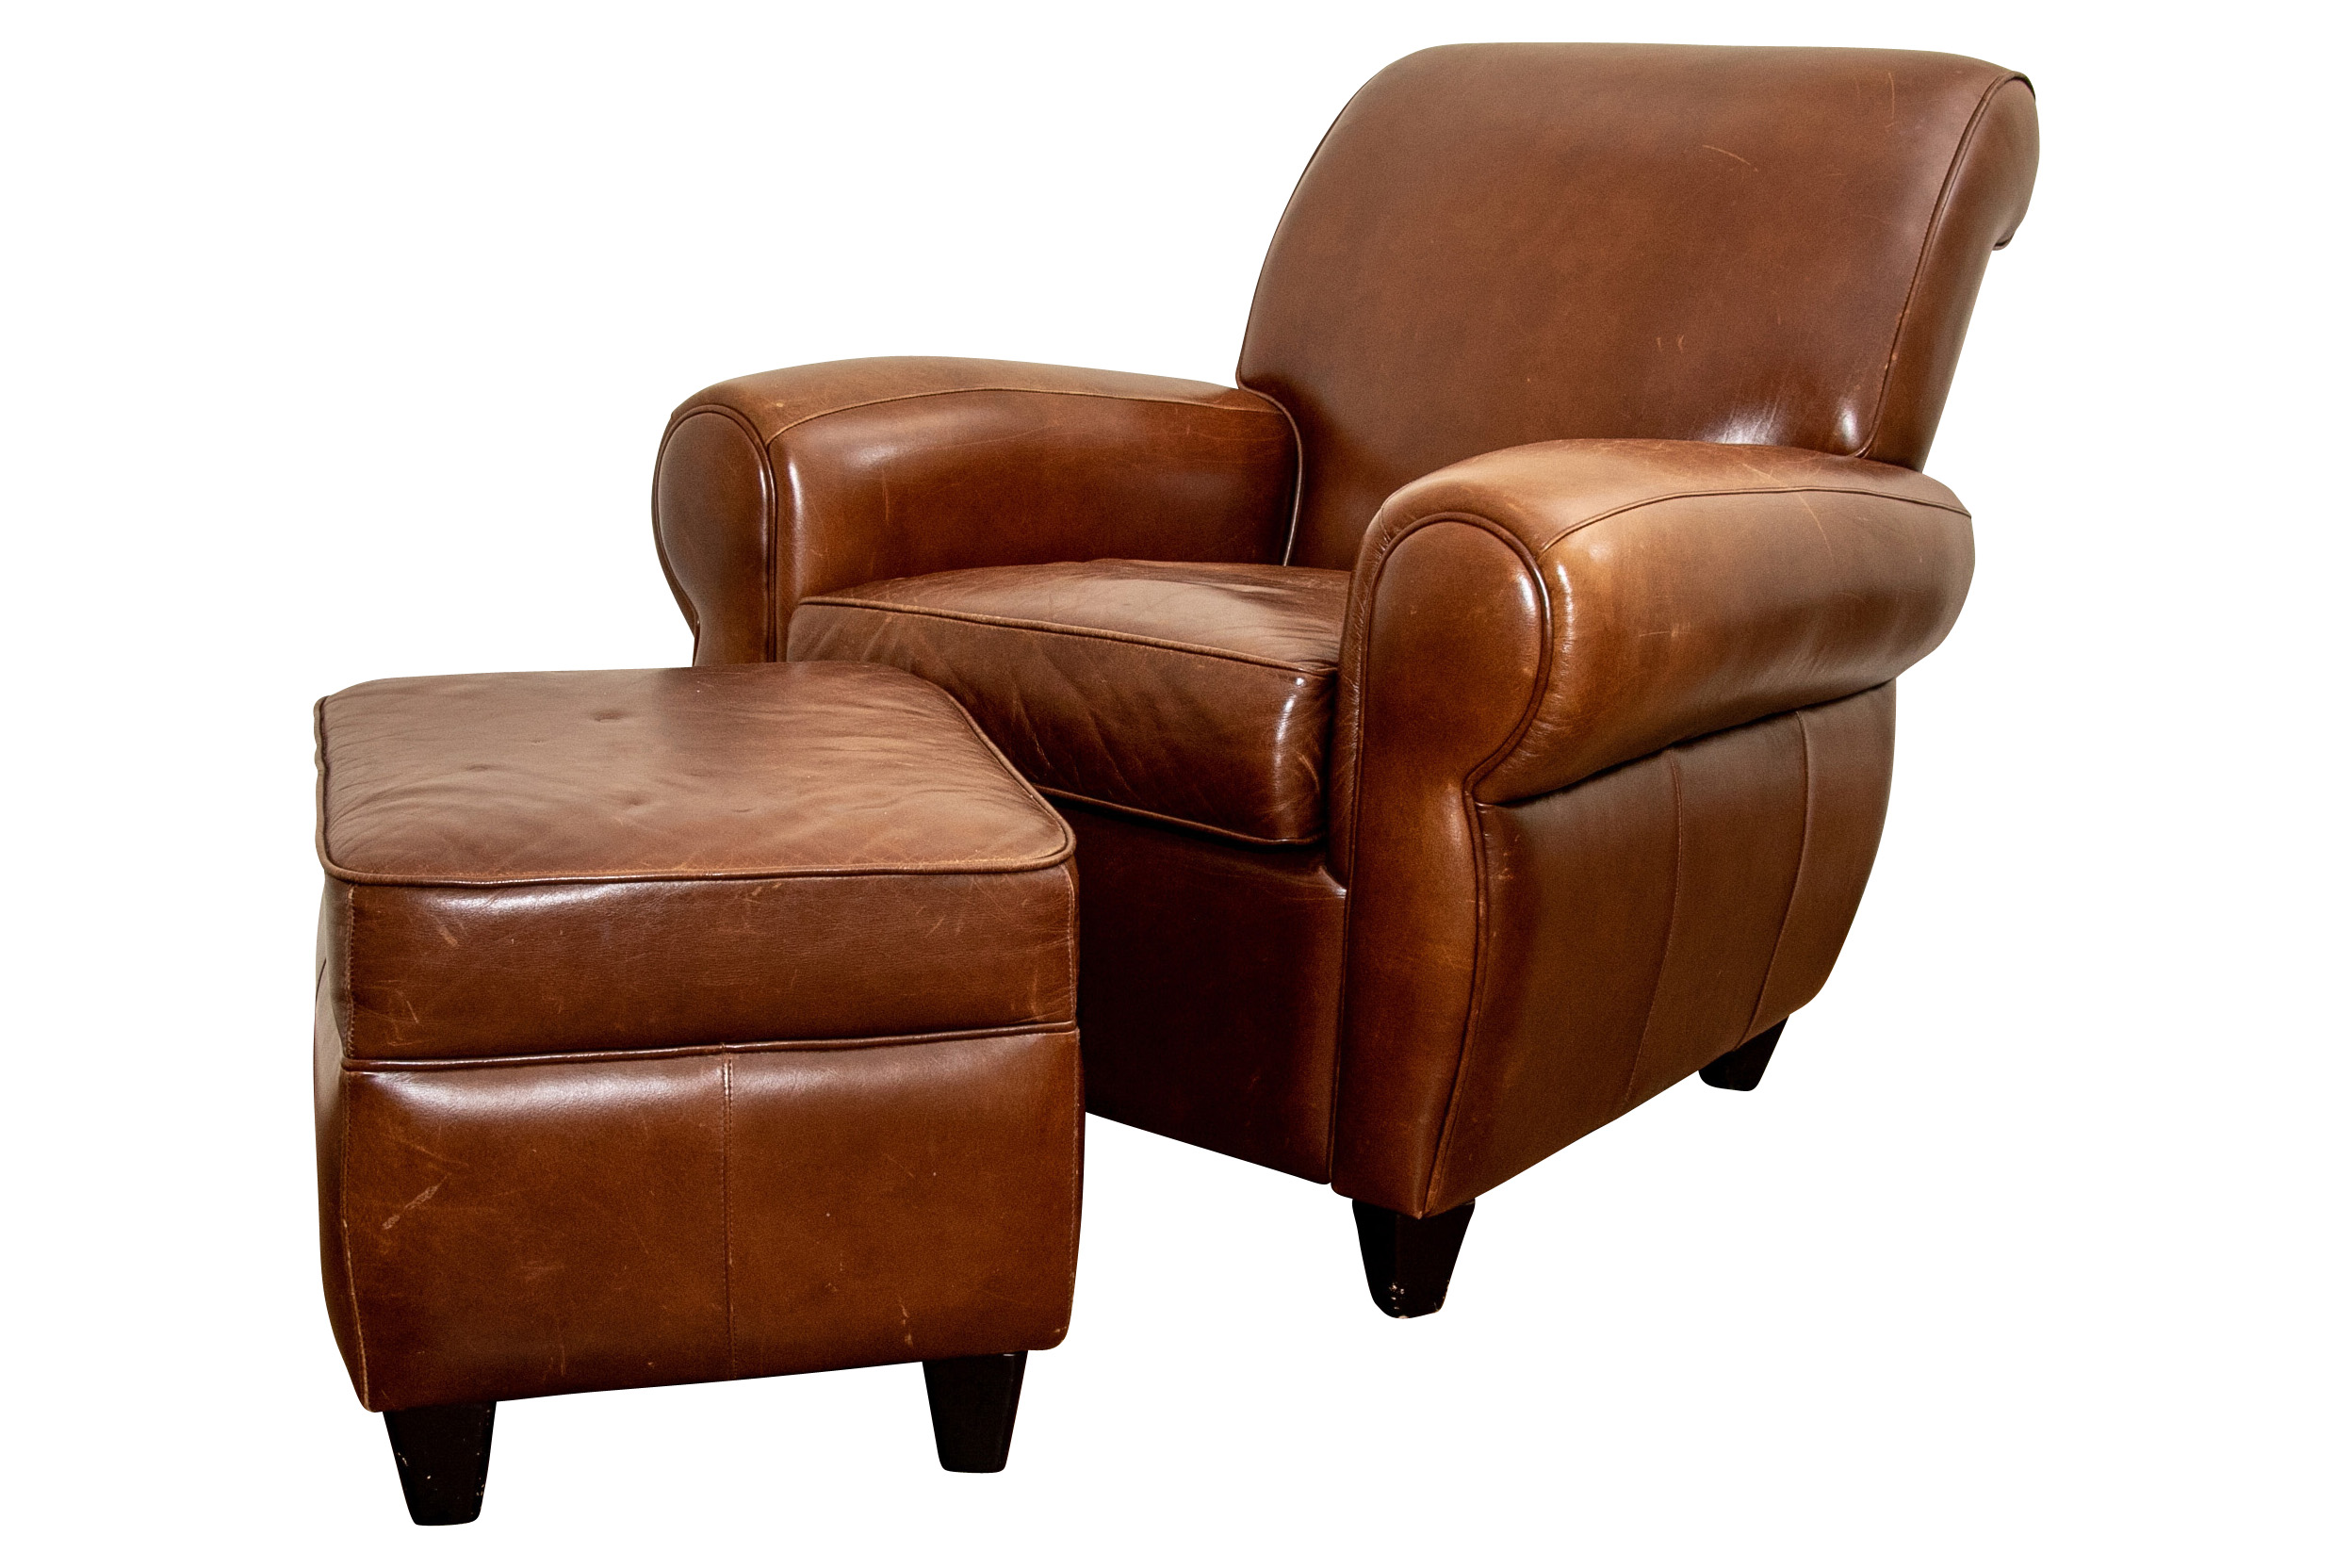 Leather Club Chair And Ottoman 87638, Club Chair With Ottoman Leather